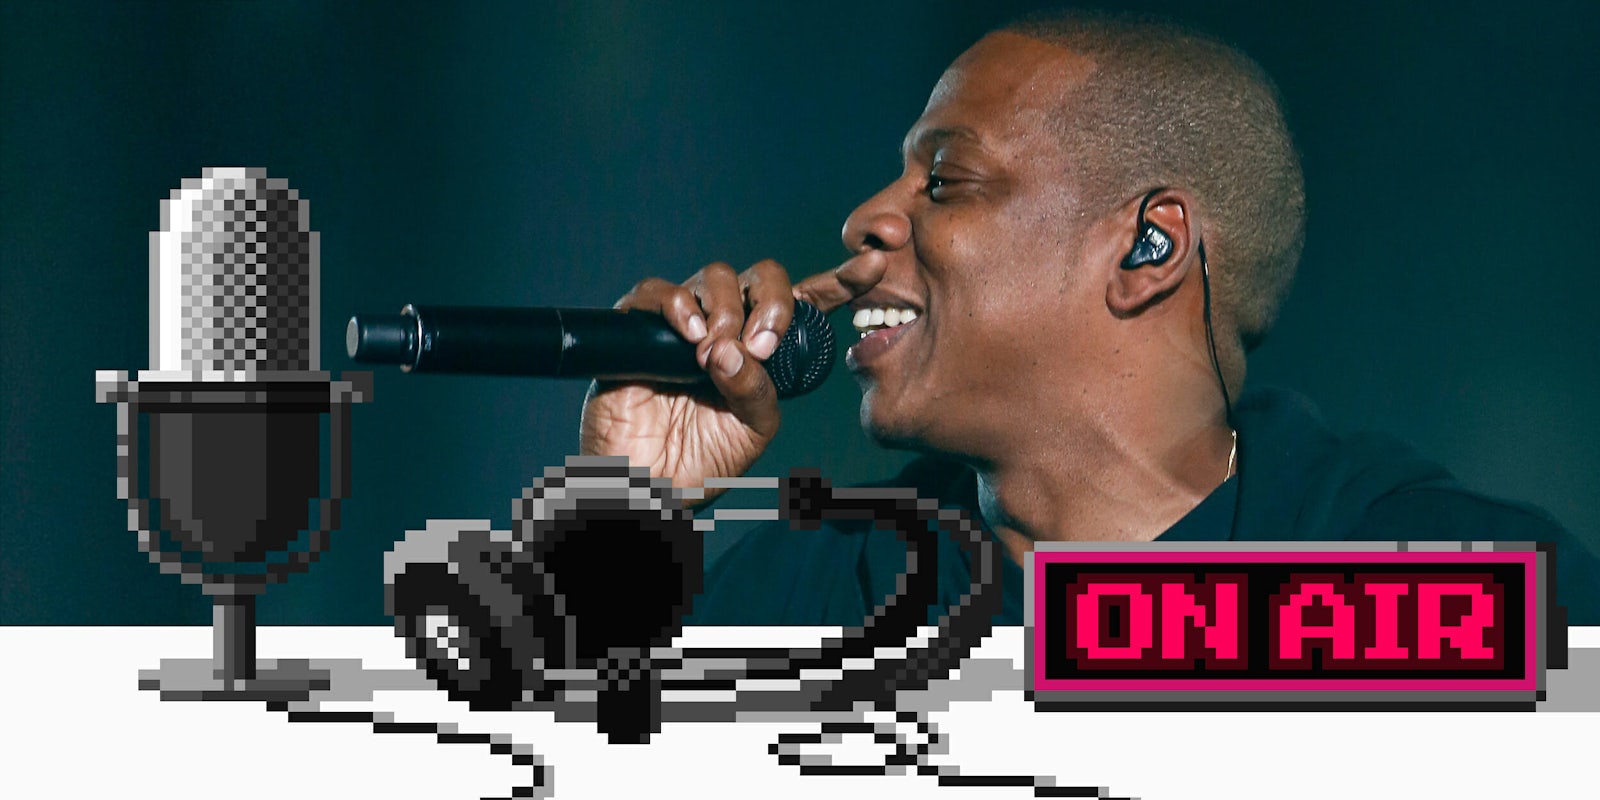 Upstream podcast discusses Jay Z